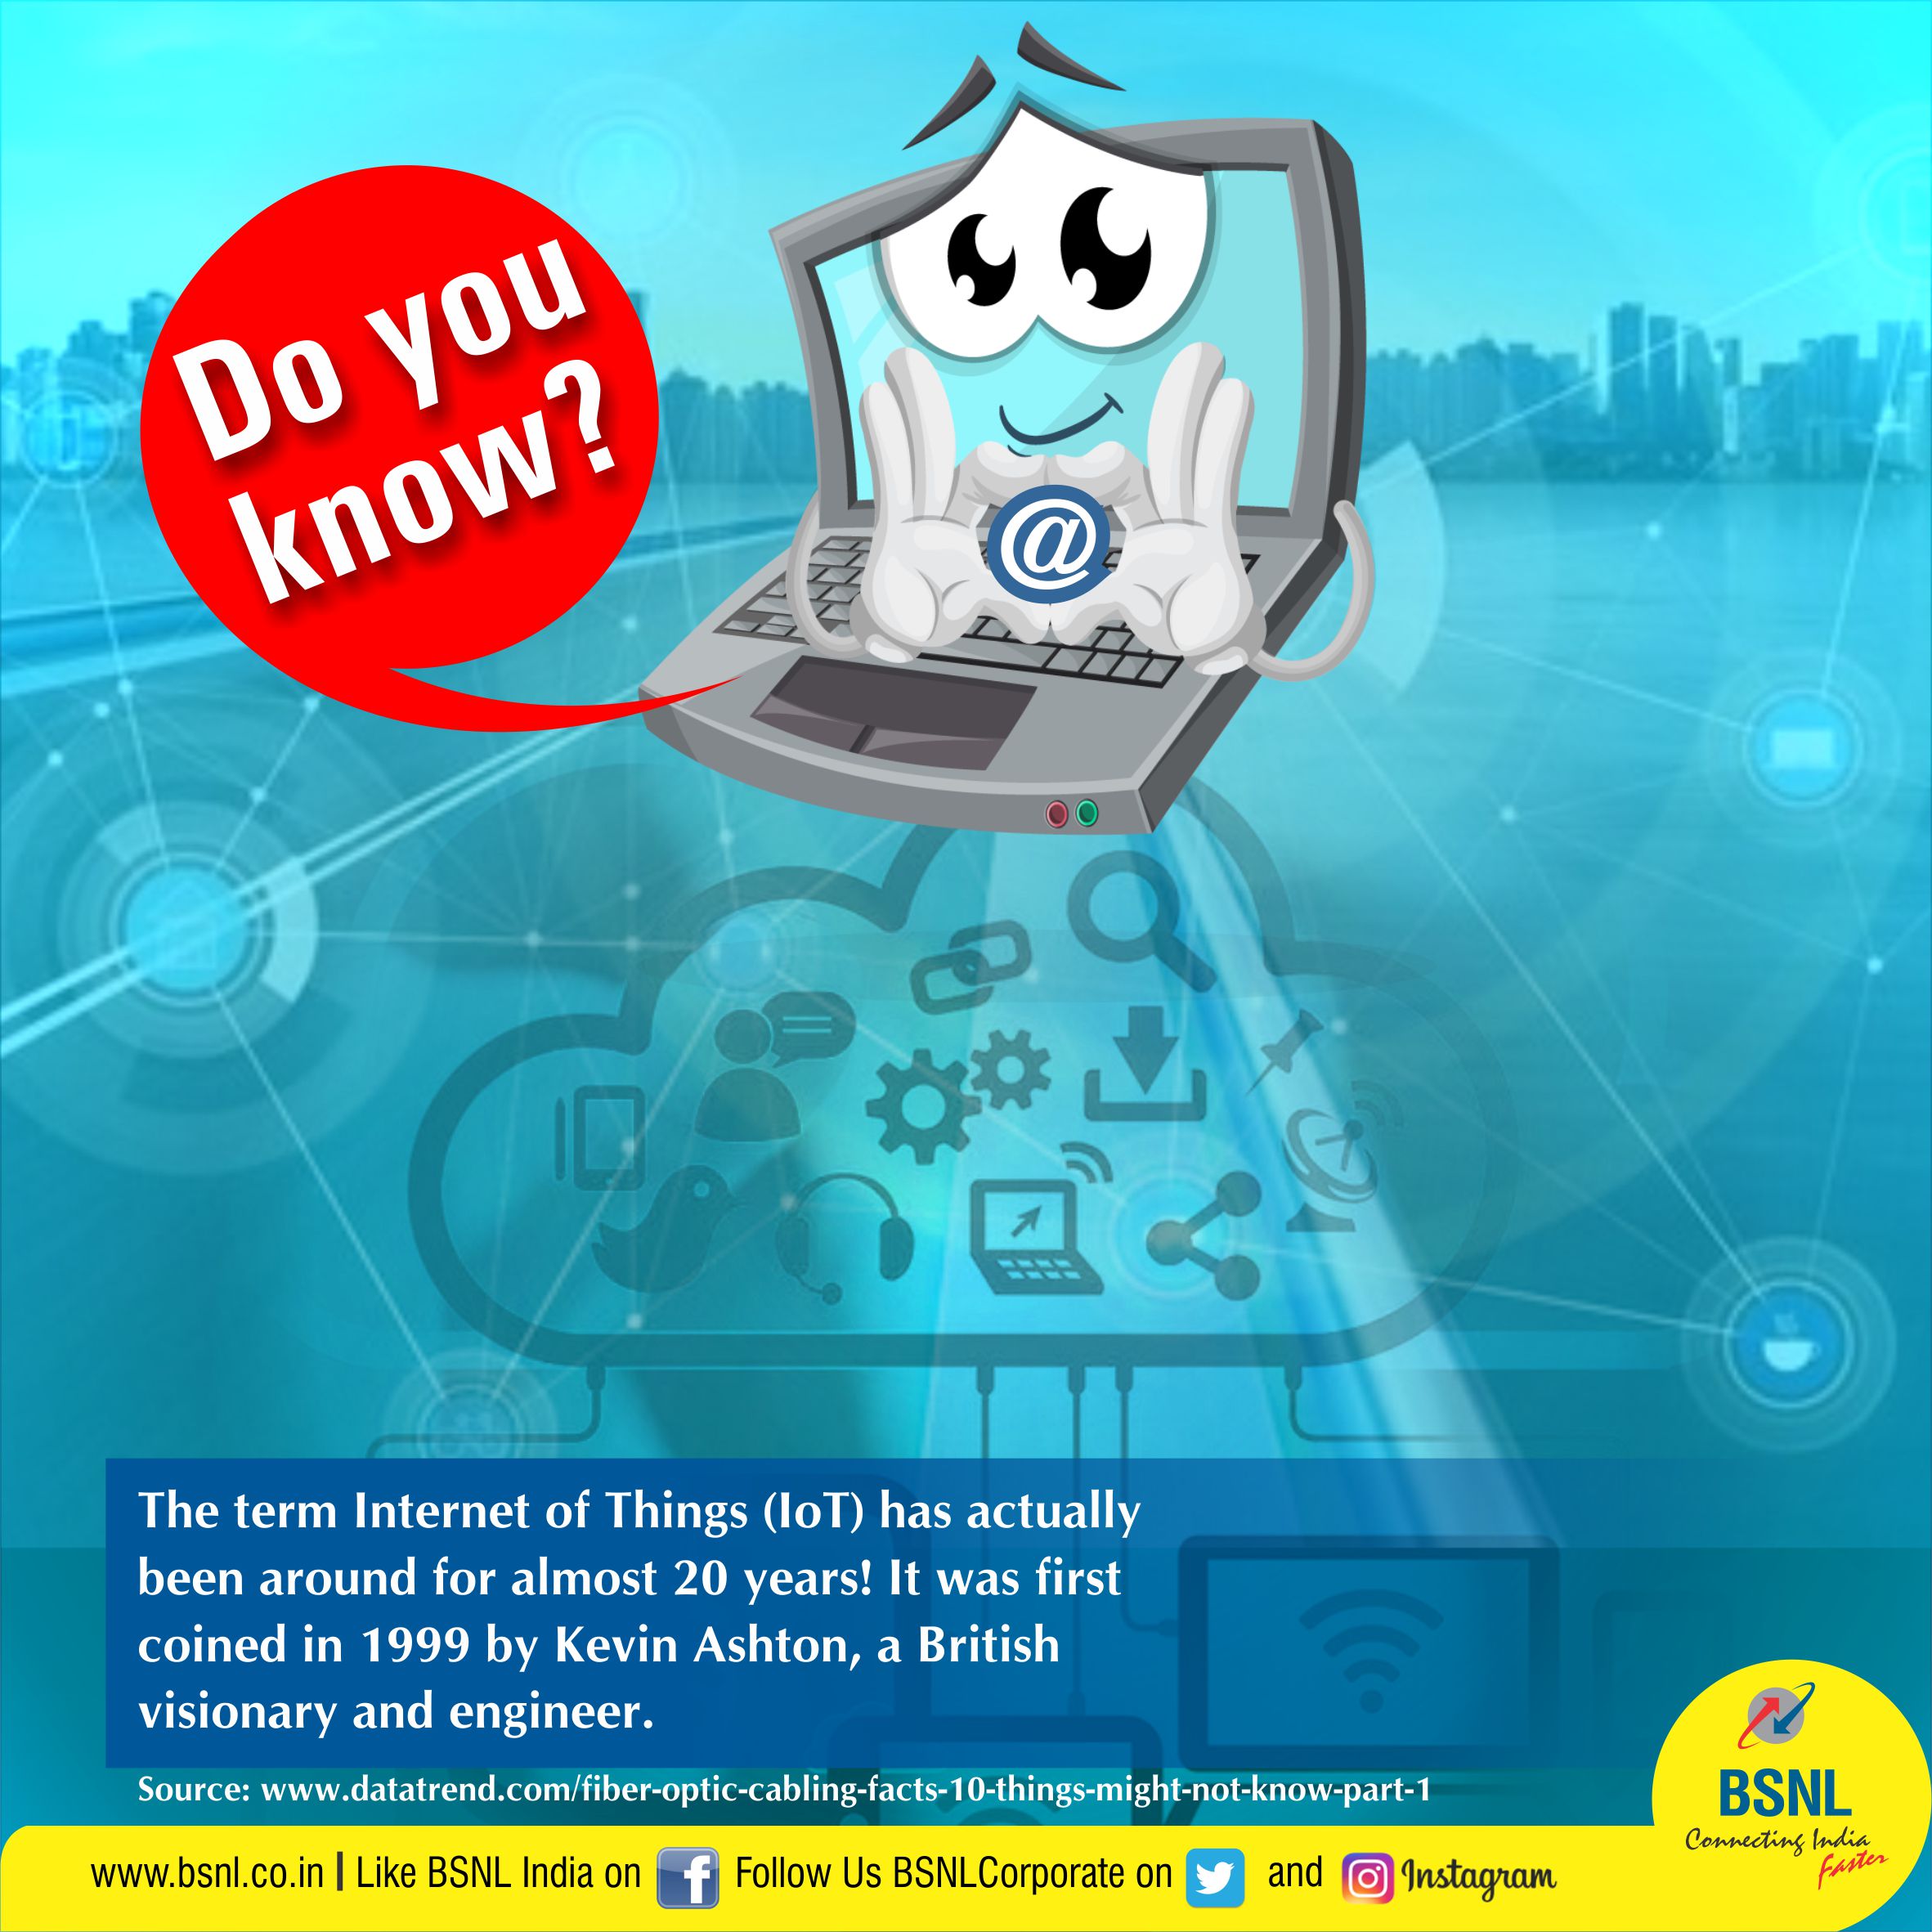 BSNL India on Twitter: "#DoYouKnow The term Internet of Things (IoT) has  actually been around for almost 20 years! It was first coined in 1999 by  Kevin Ashton, a British visionary and